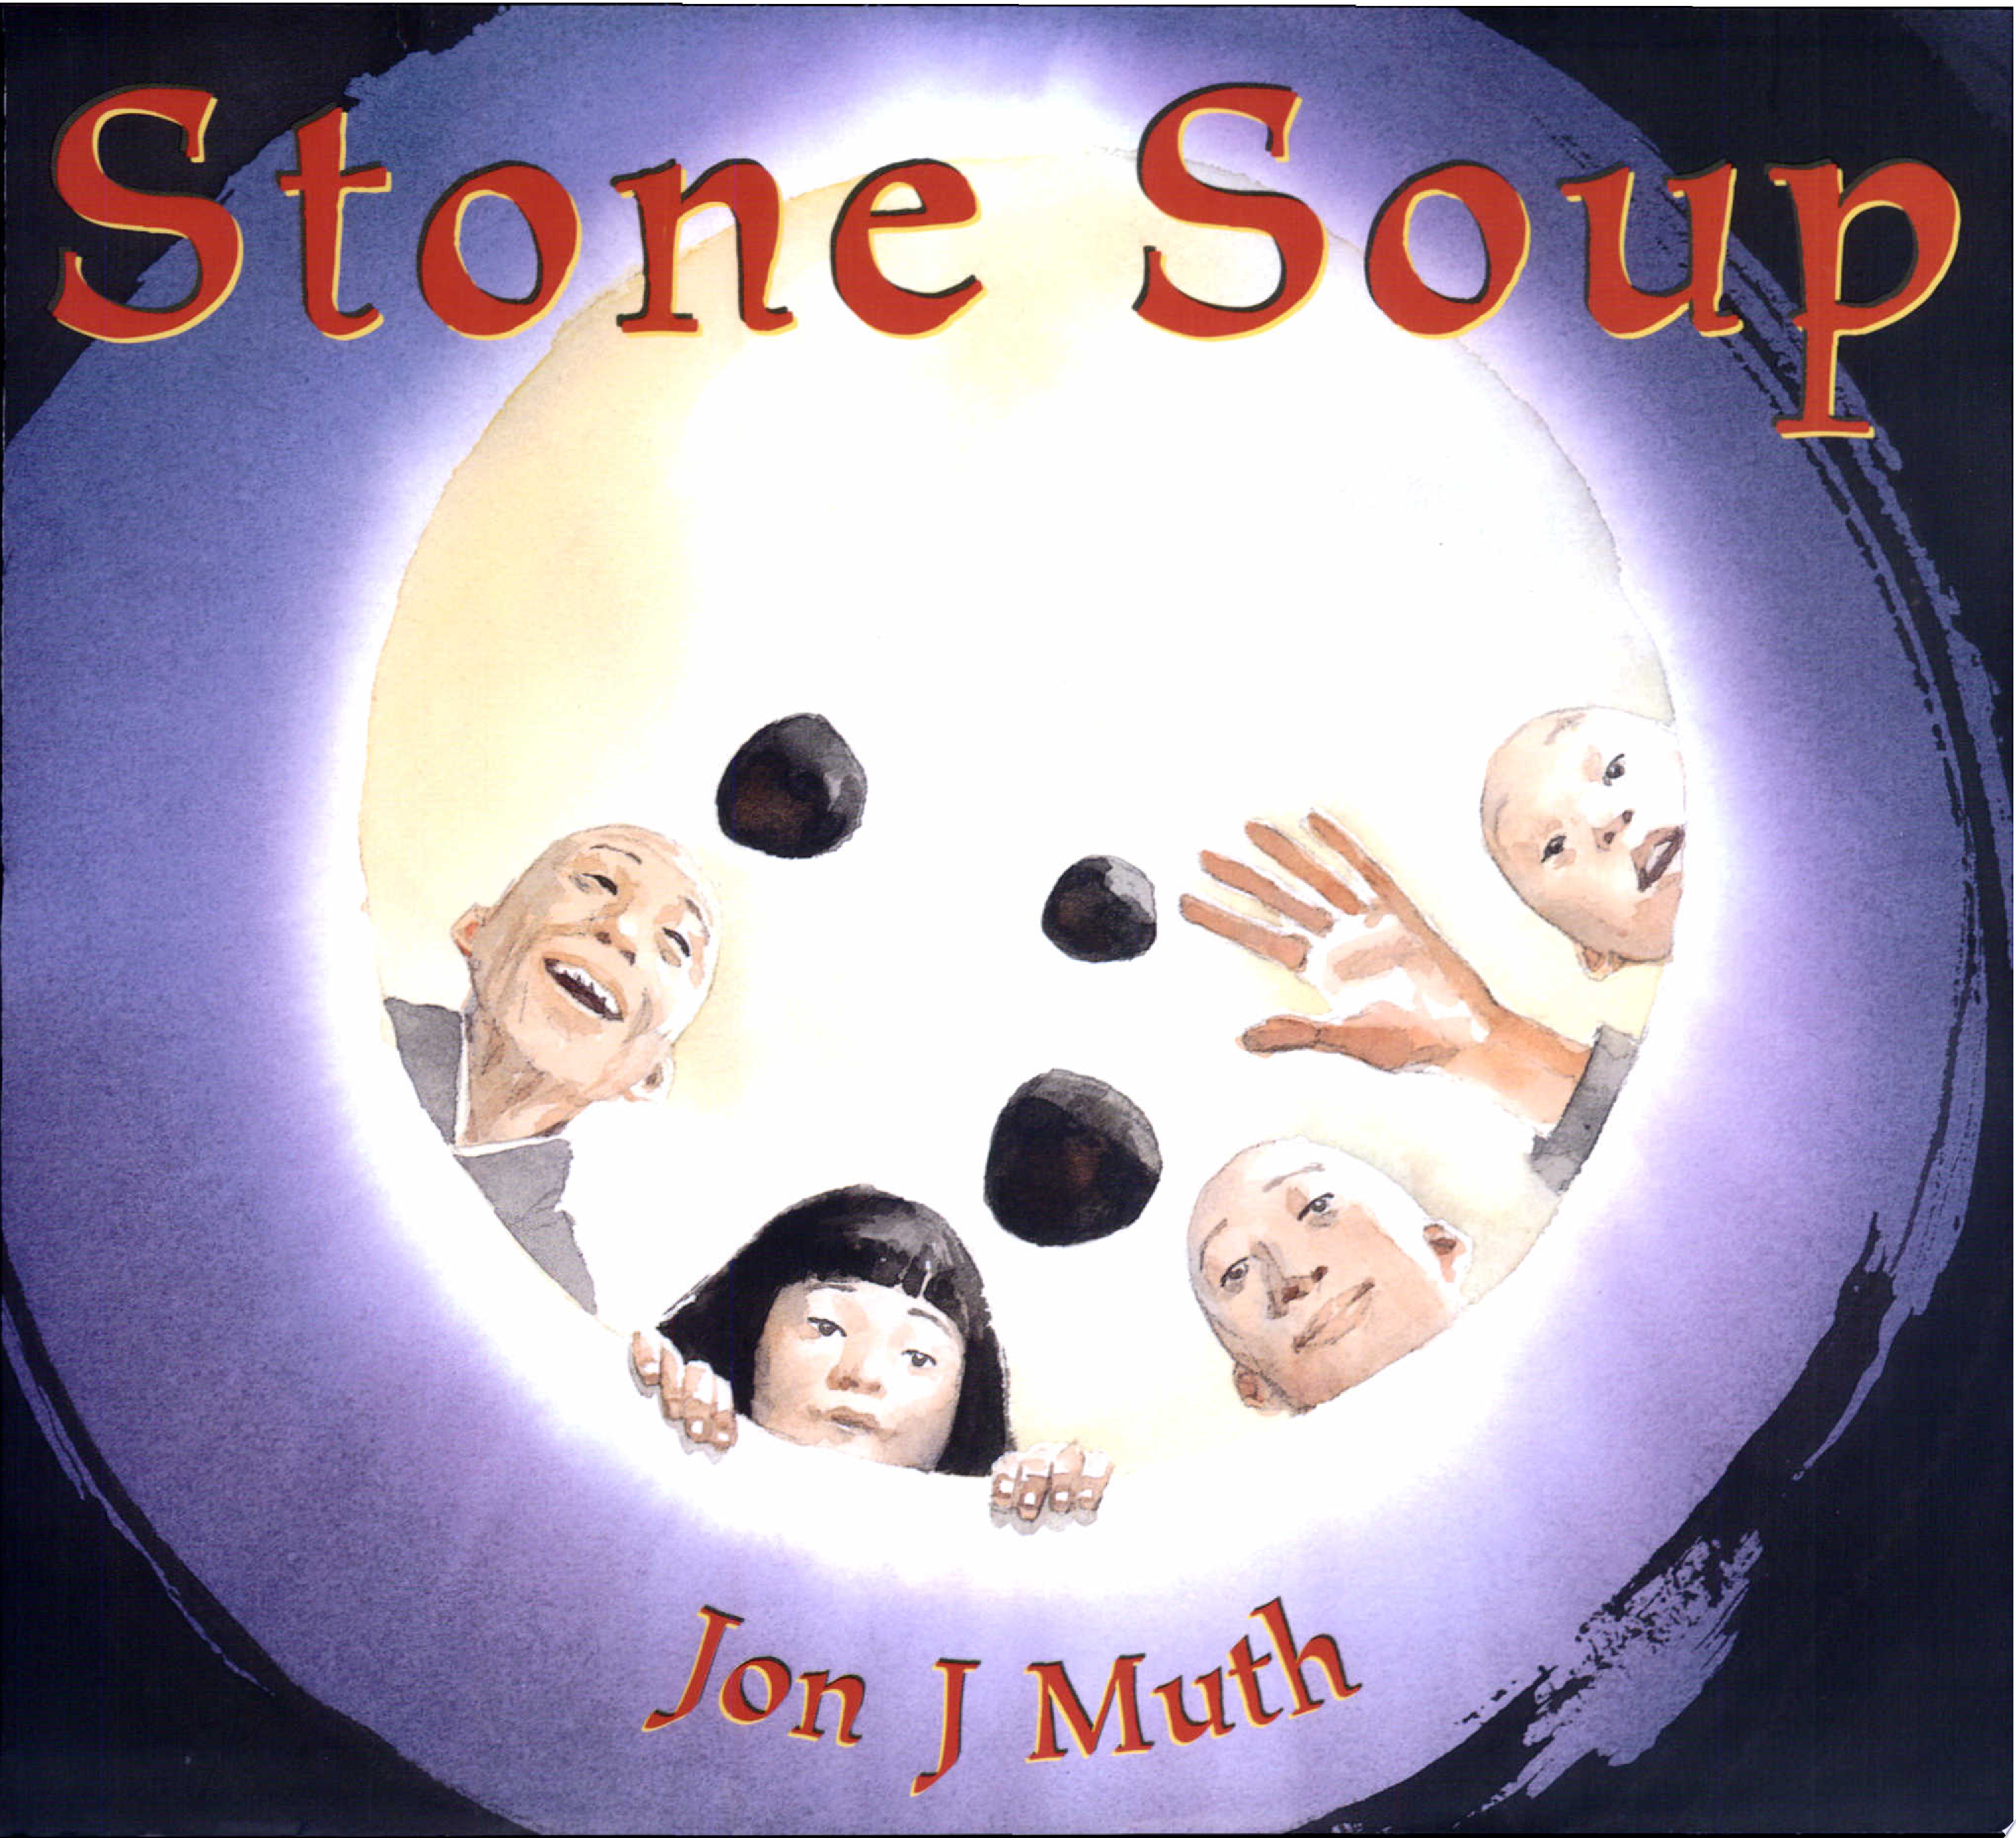 Image for "Stone Soup"